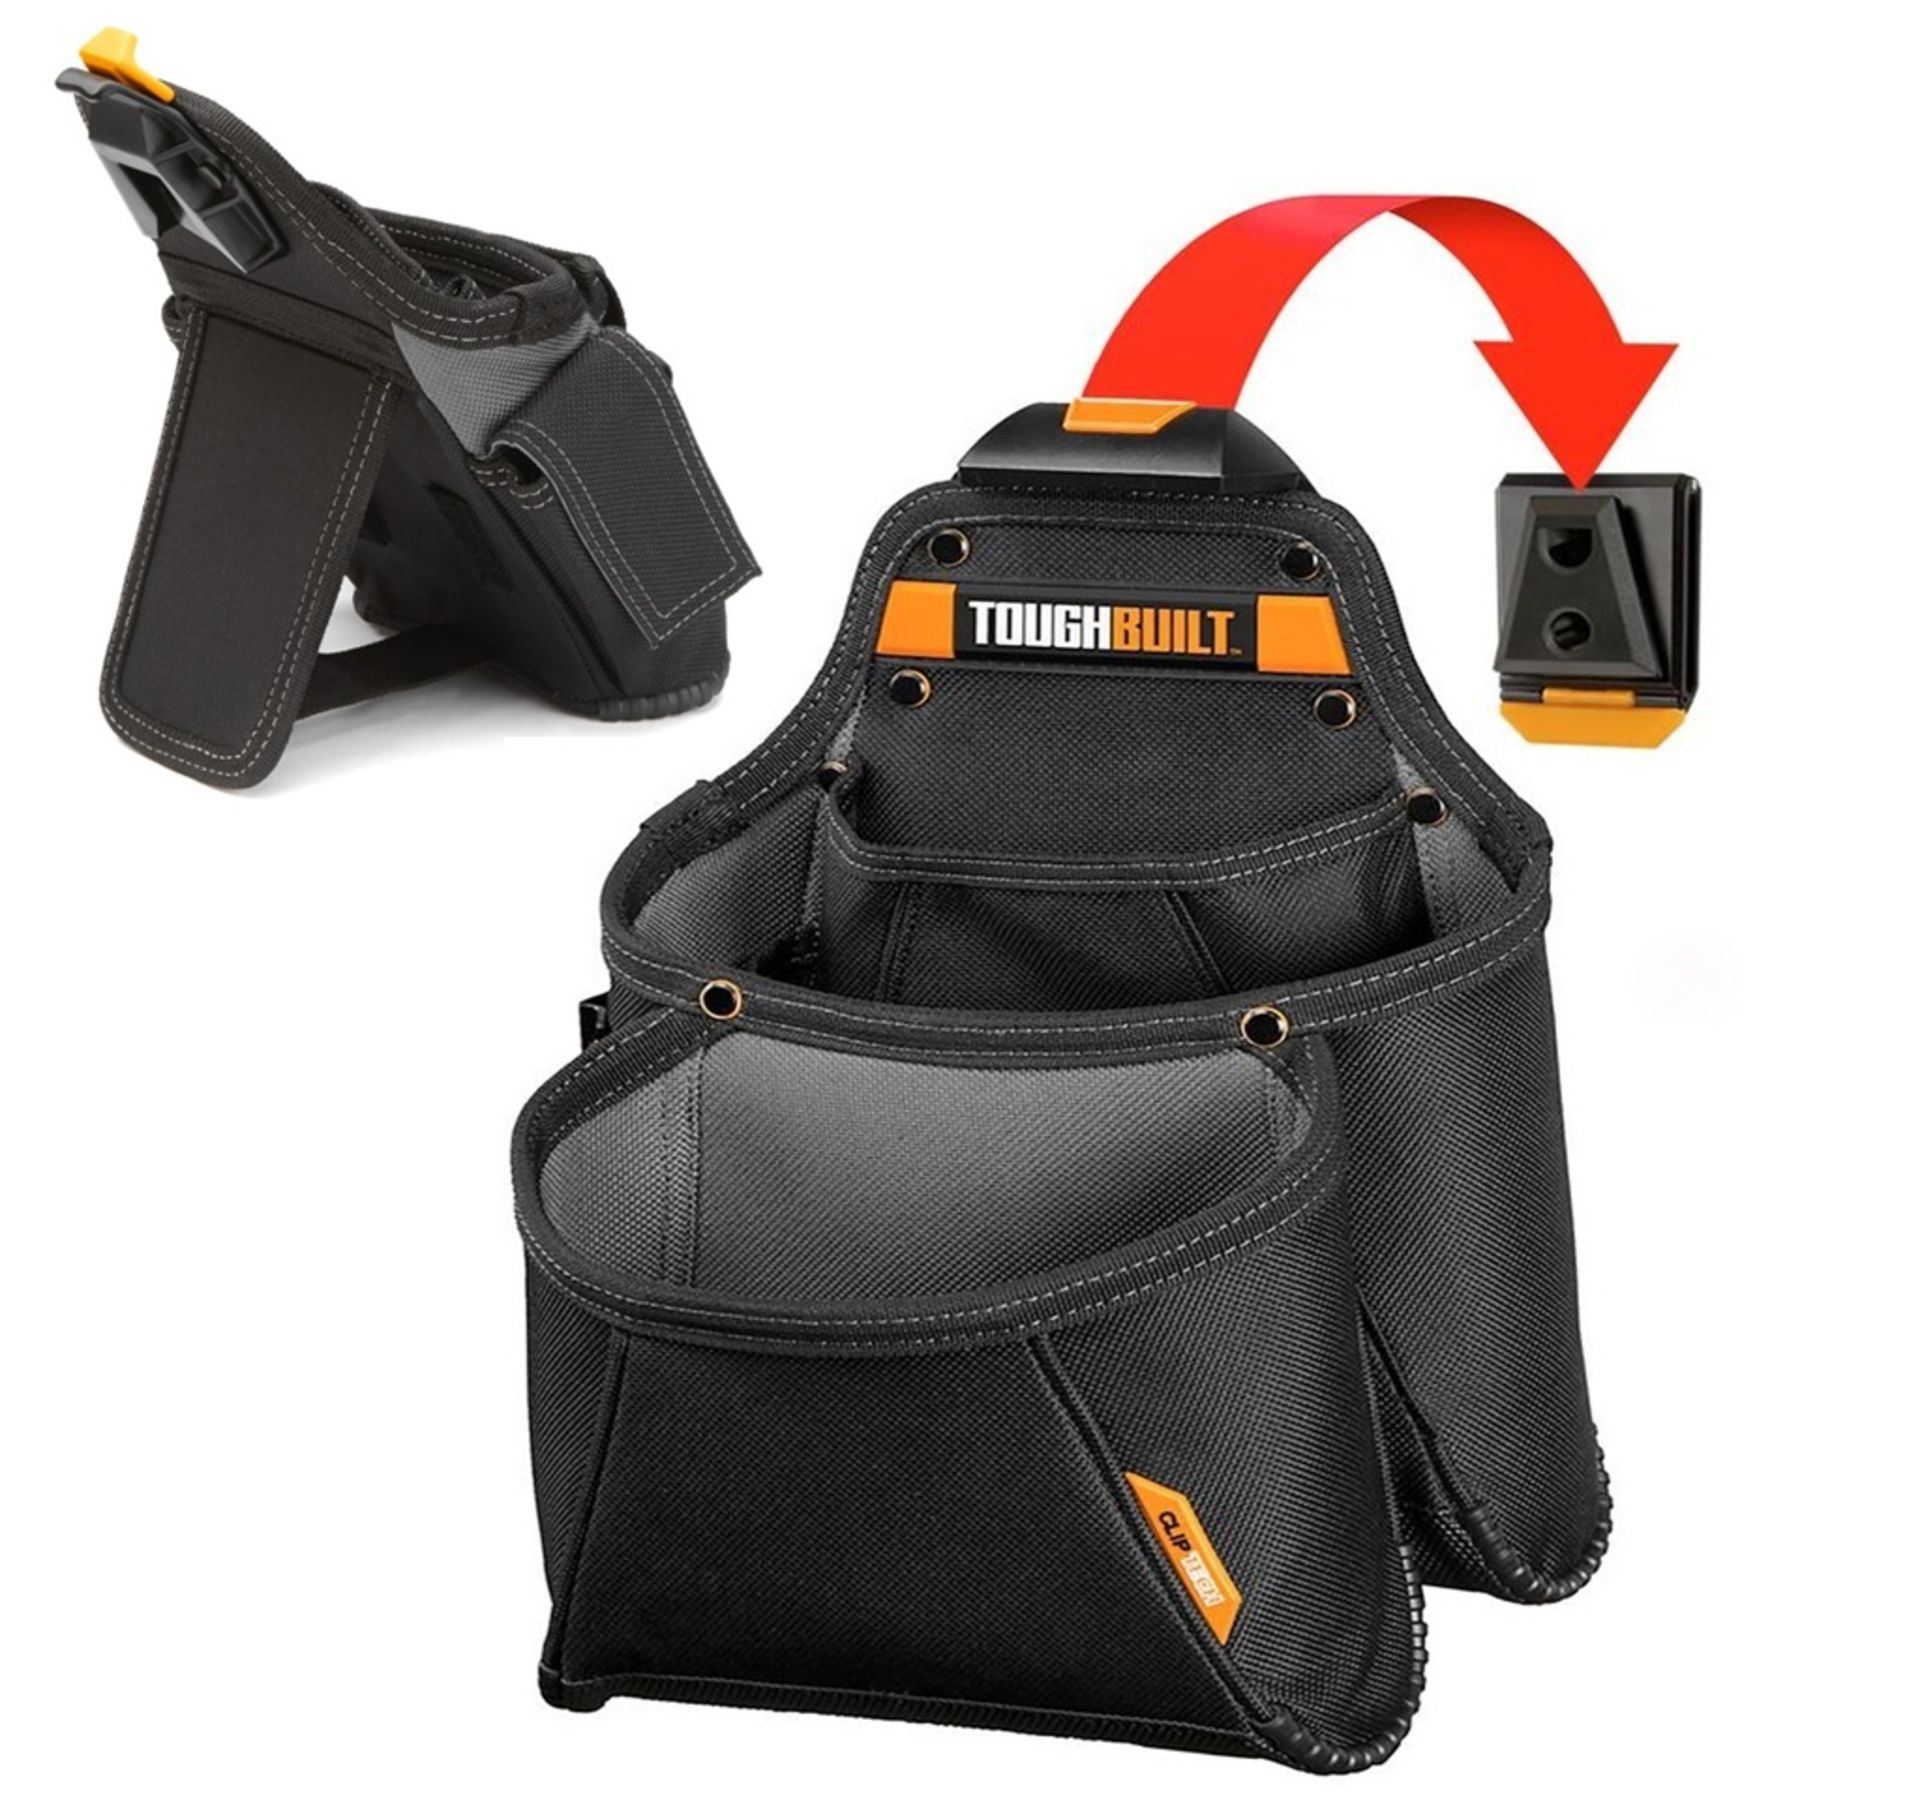 Toughbuilt SUPPLY POUCH Rougth neck grade with upright kick stand & cliptech belt release